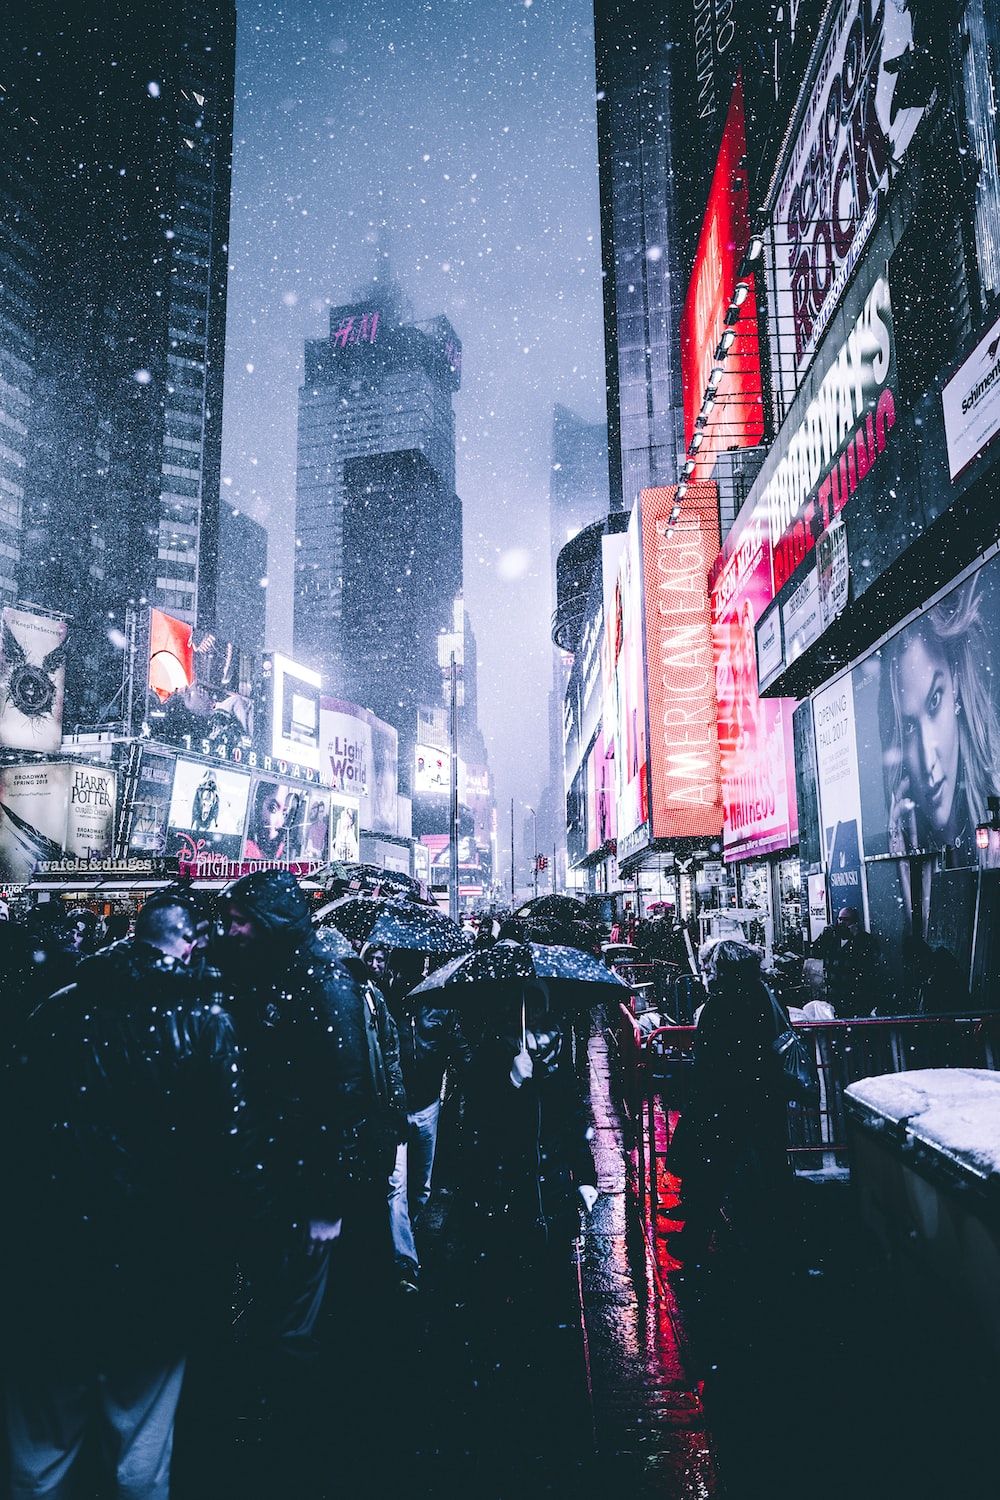 People walking on the street during snowfall - New York